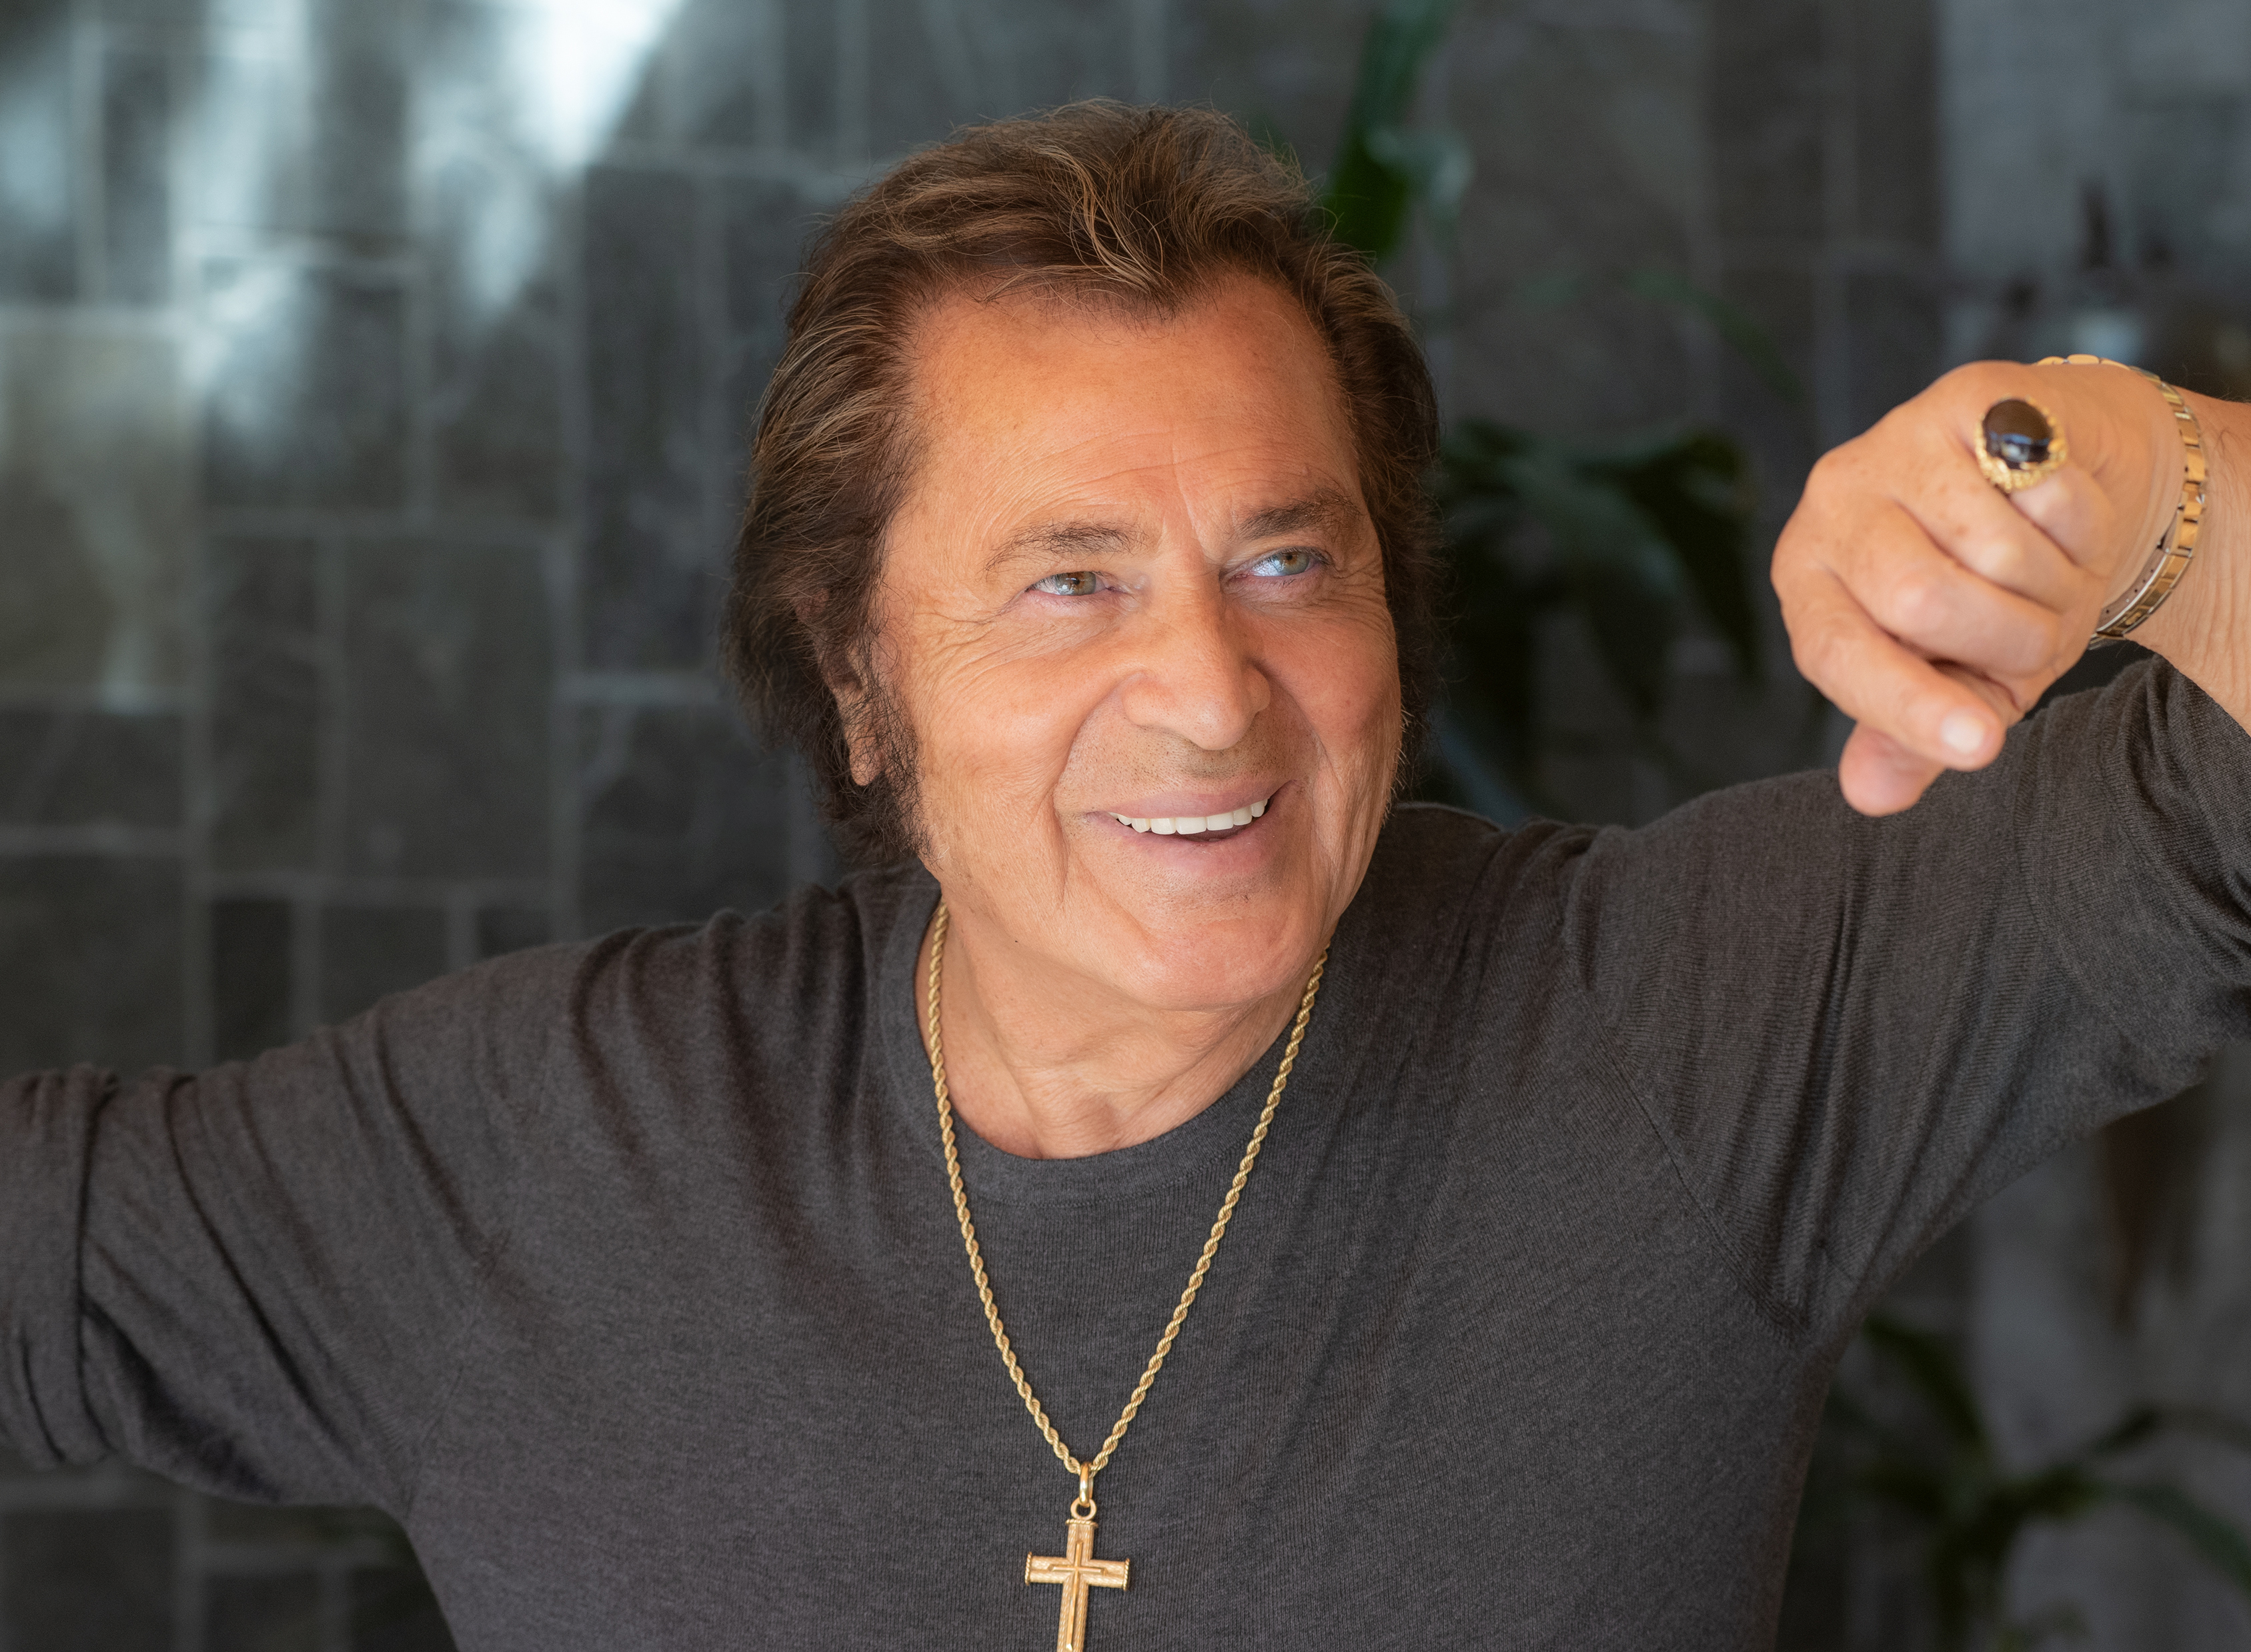 Engelbert Humperdinck Releases Timeless Love Album ‘All About Love’ and Embarks on World Tour